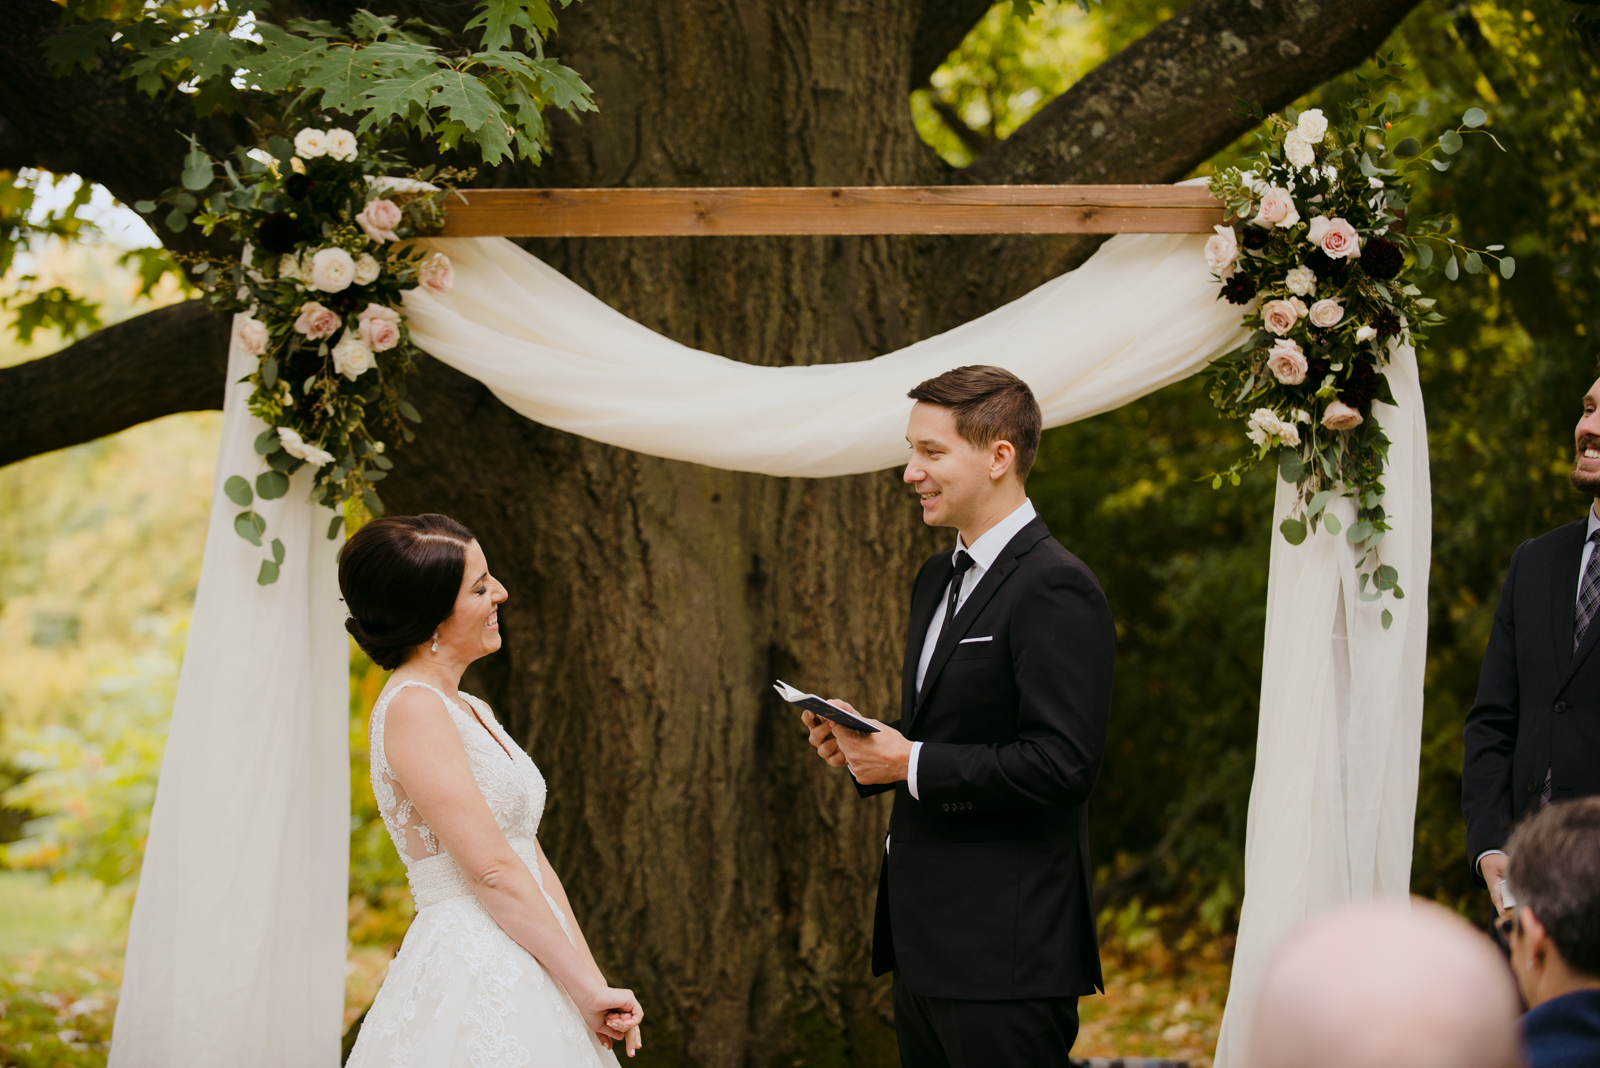 groom reading his vows during outdoor wedding ceremony